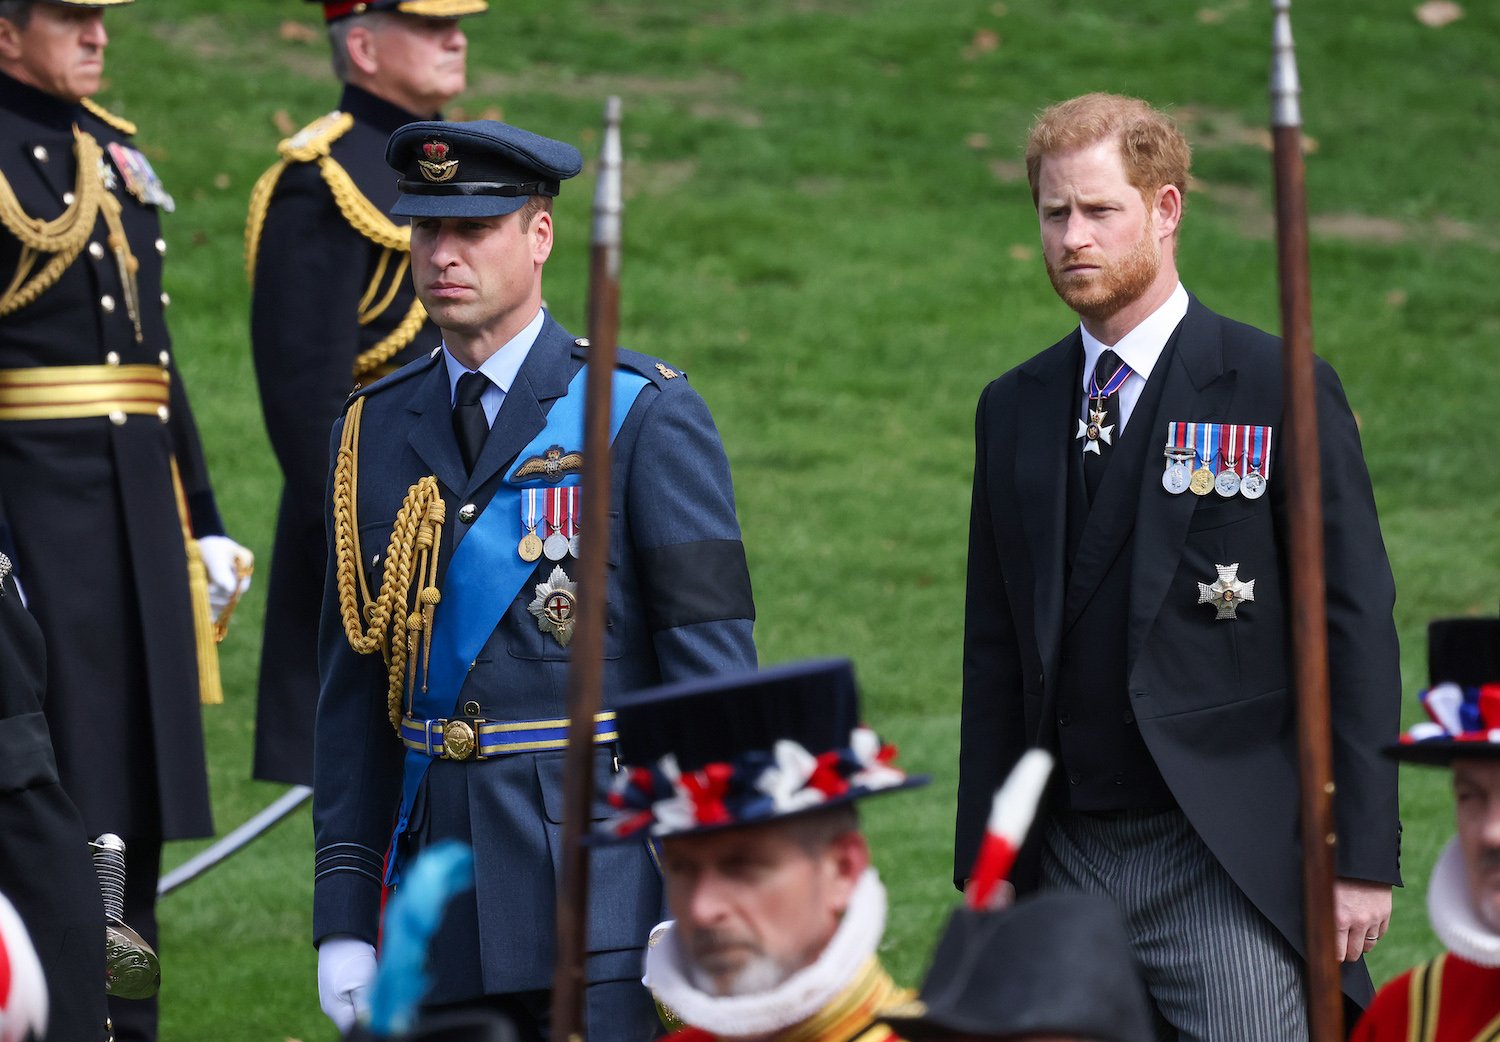 Prince William and Prince Harry walk together at Queen Elizabeth's funeral